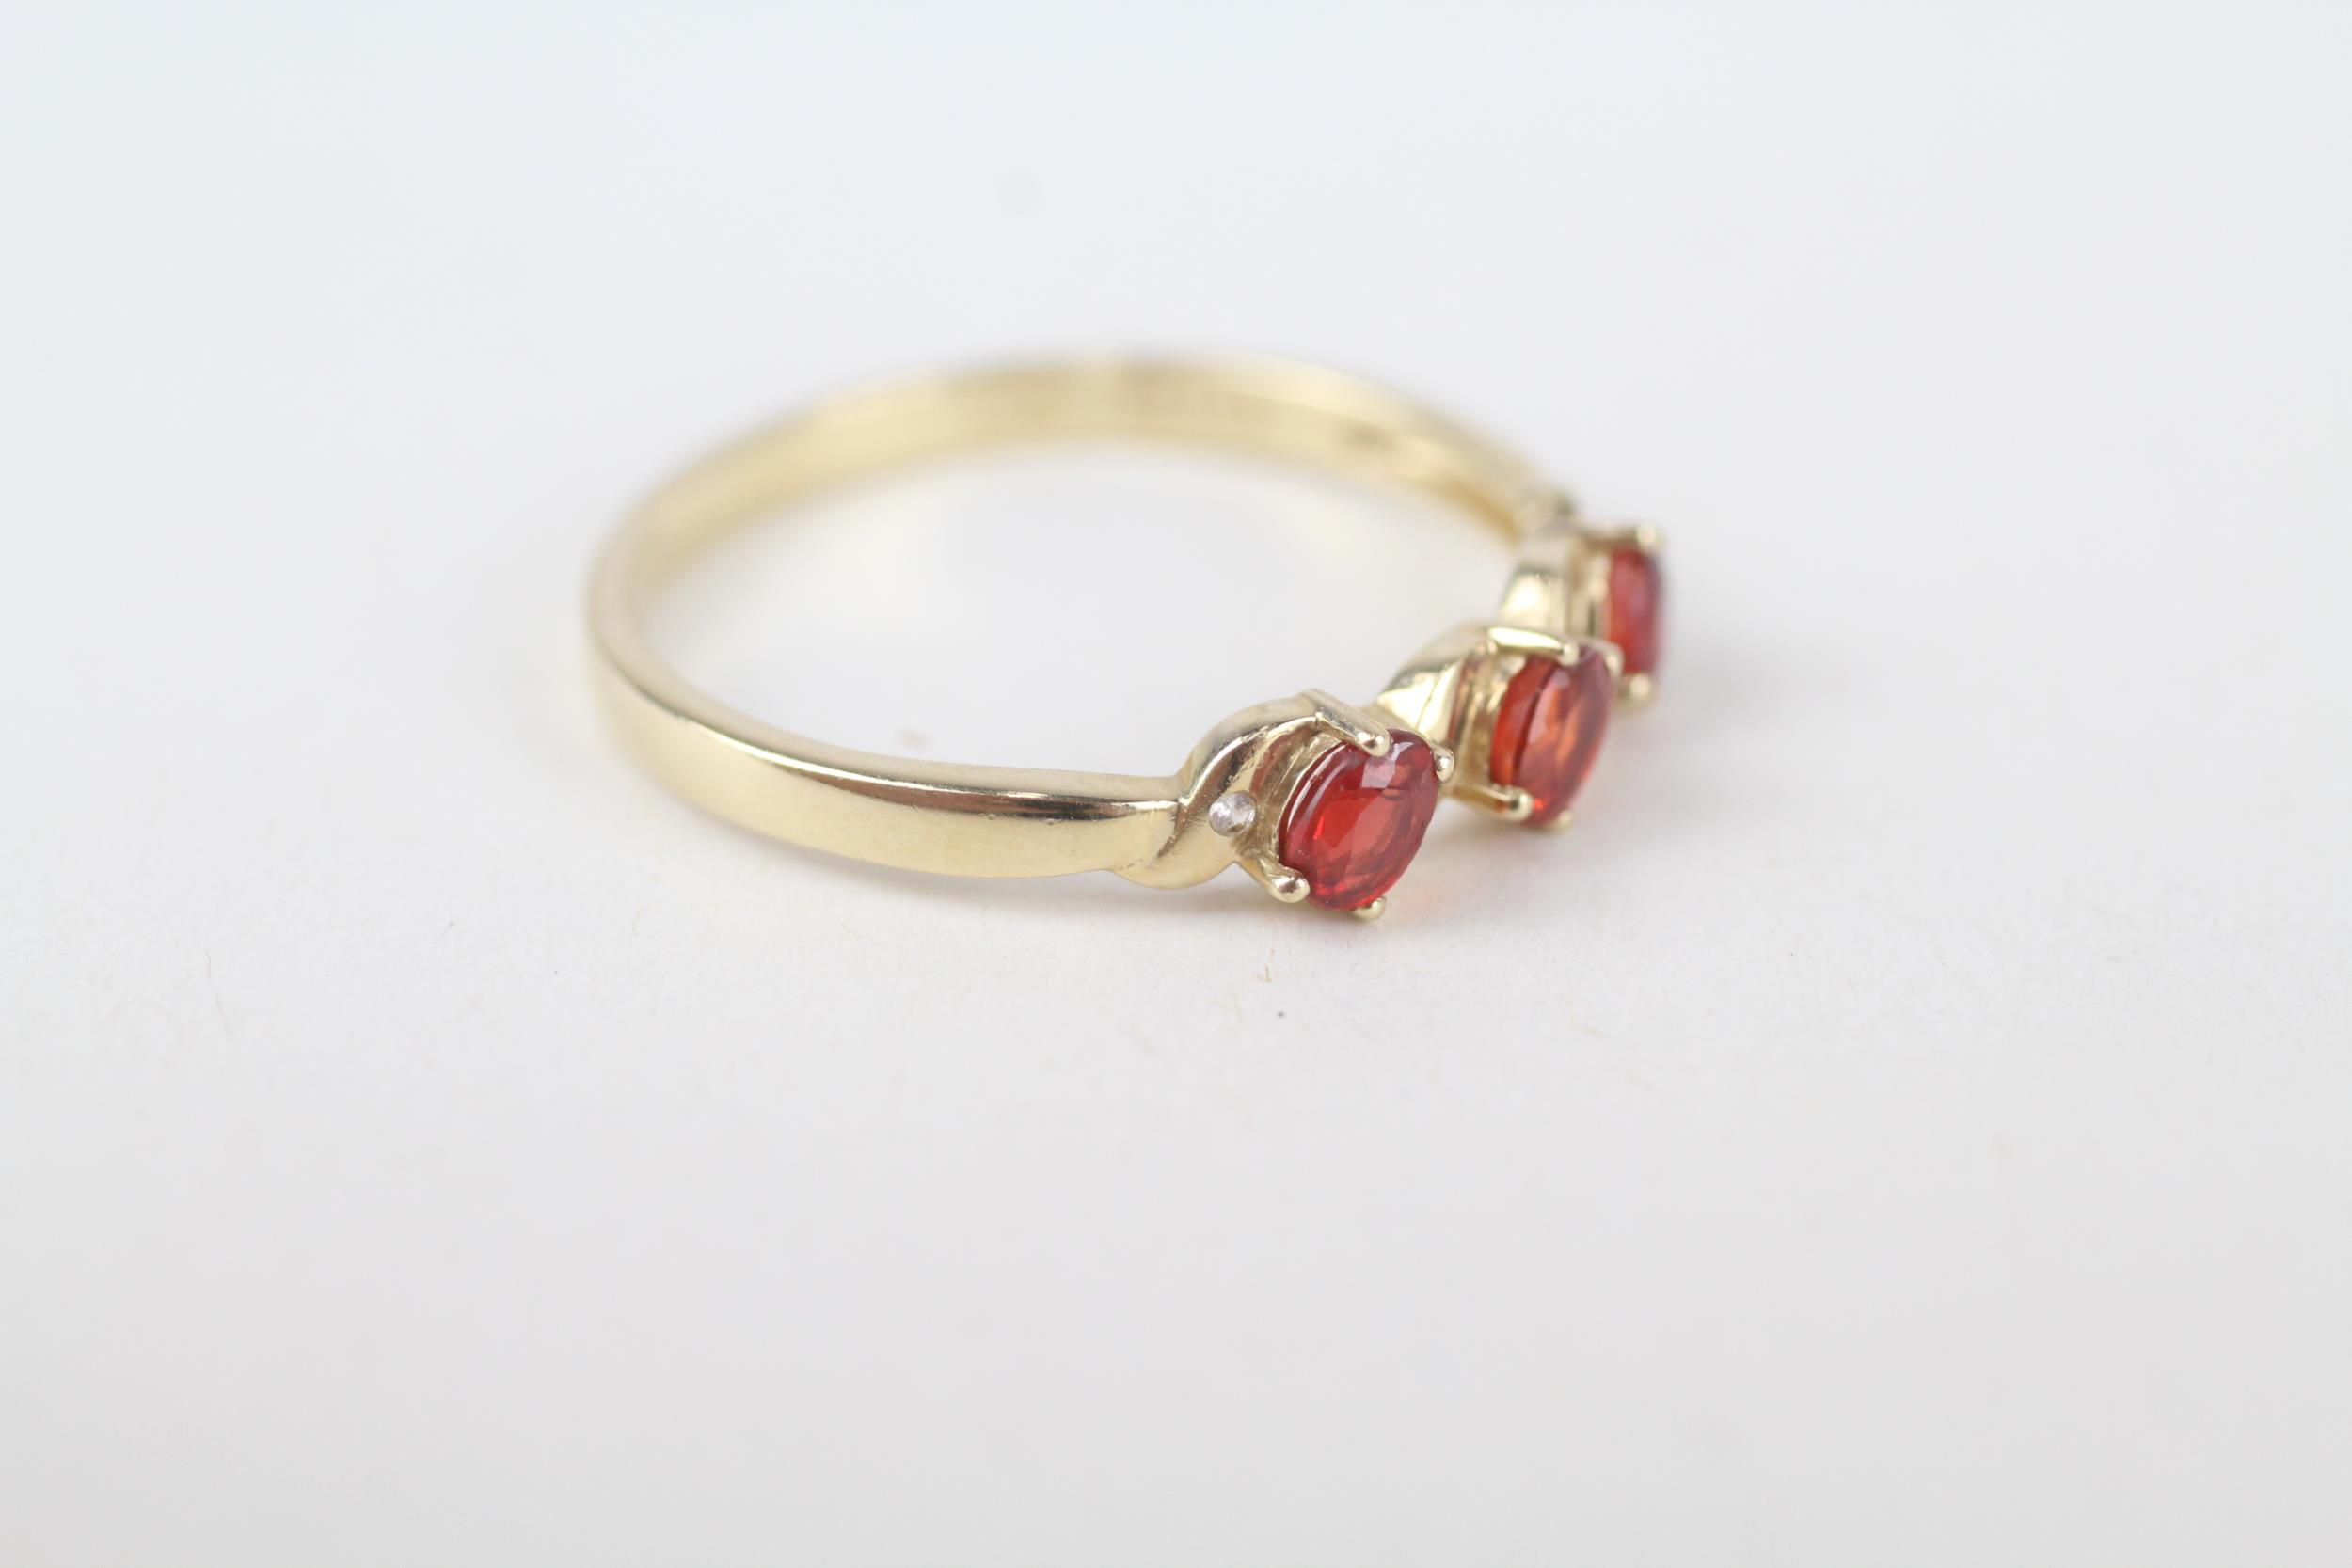 9ct gold red gemstone three stone ring with white gemstone accent Size T 2 g - Image 3 of 5